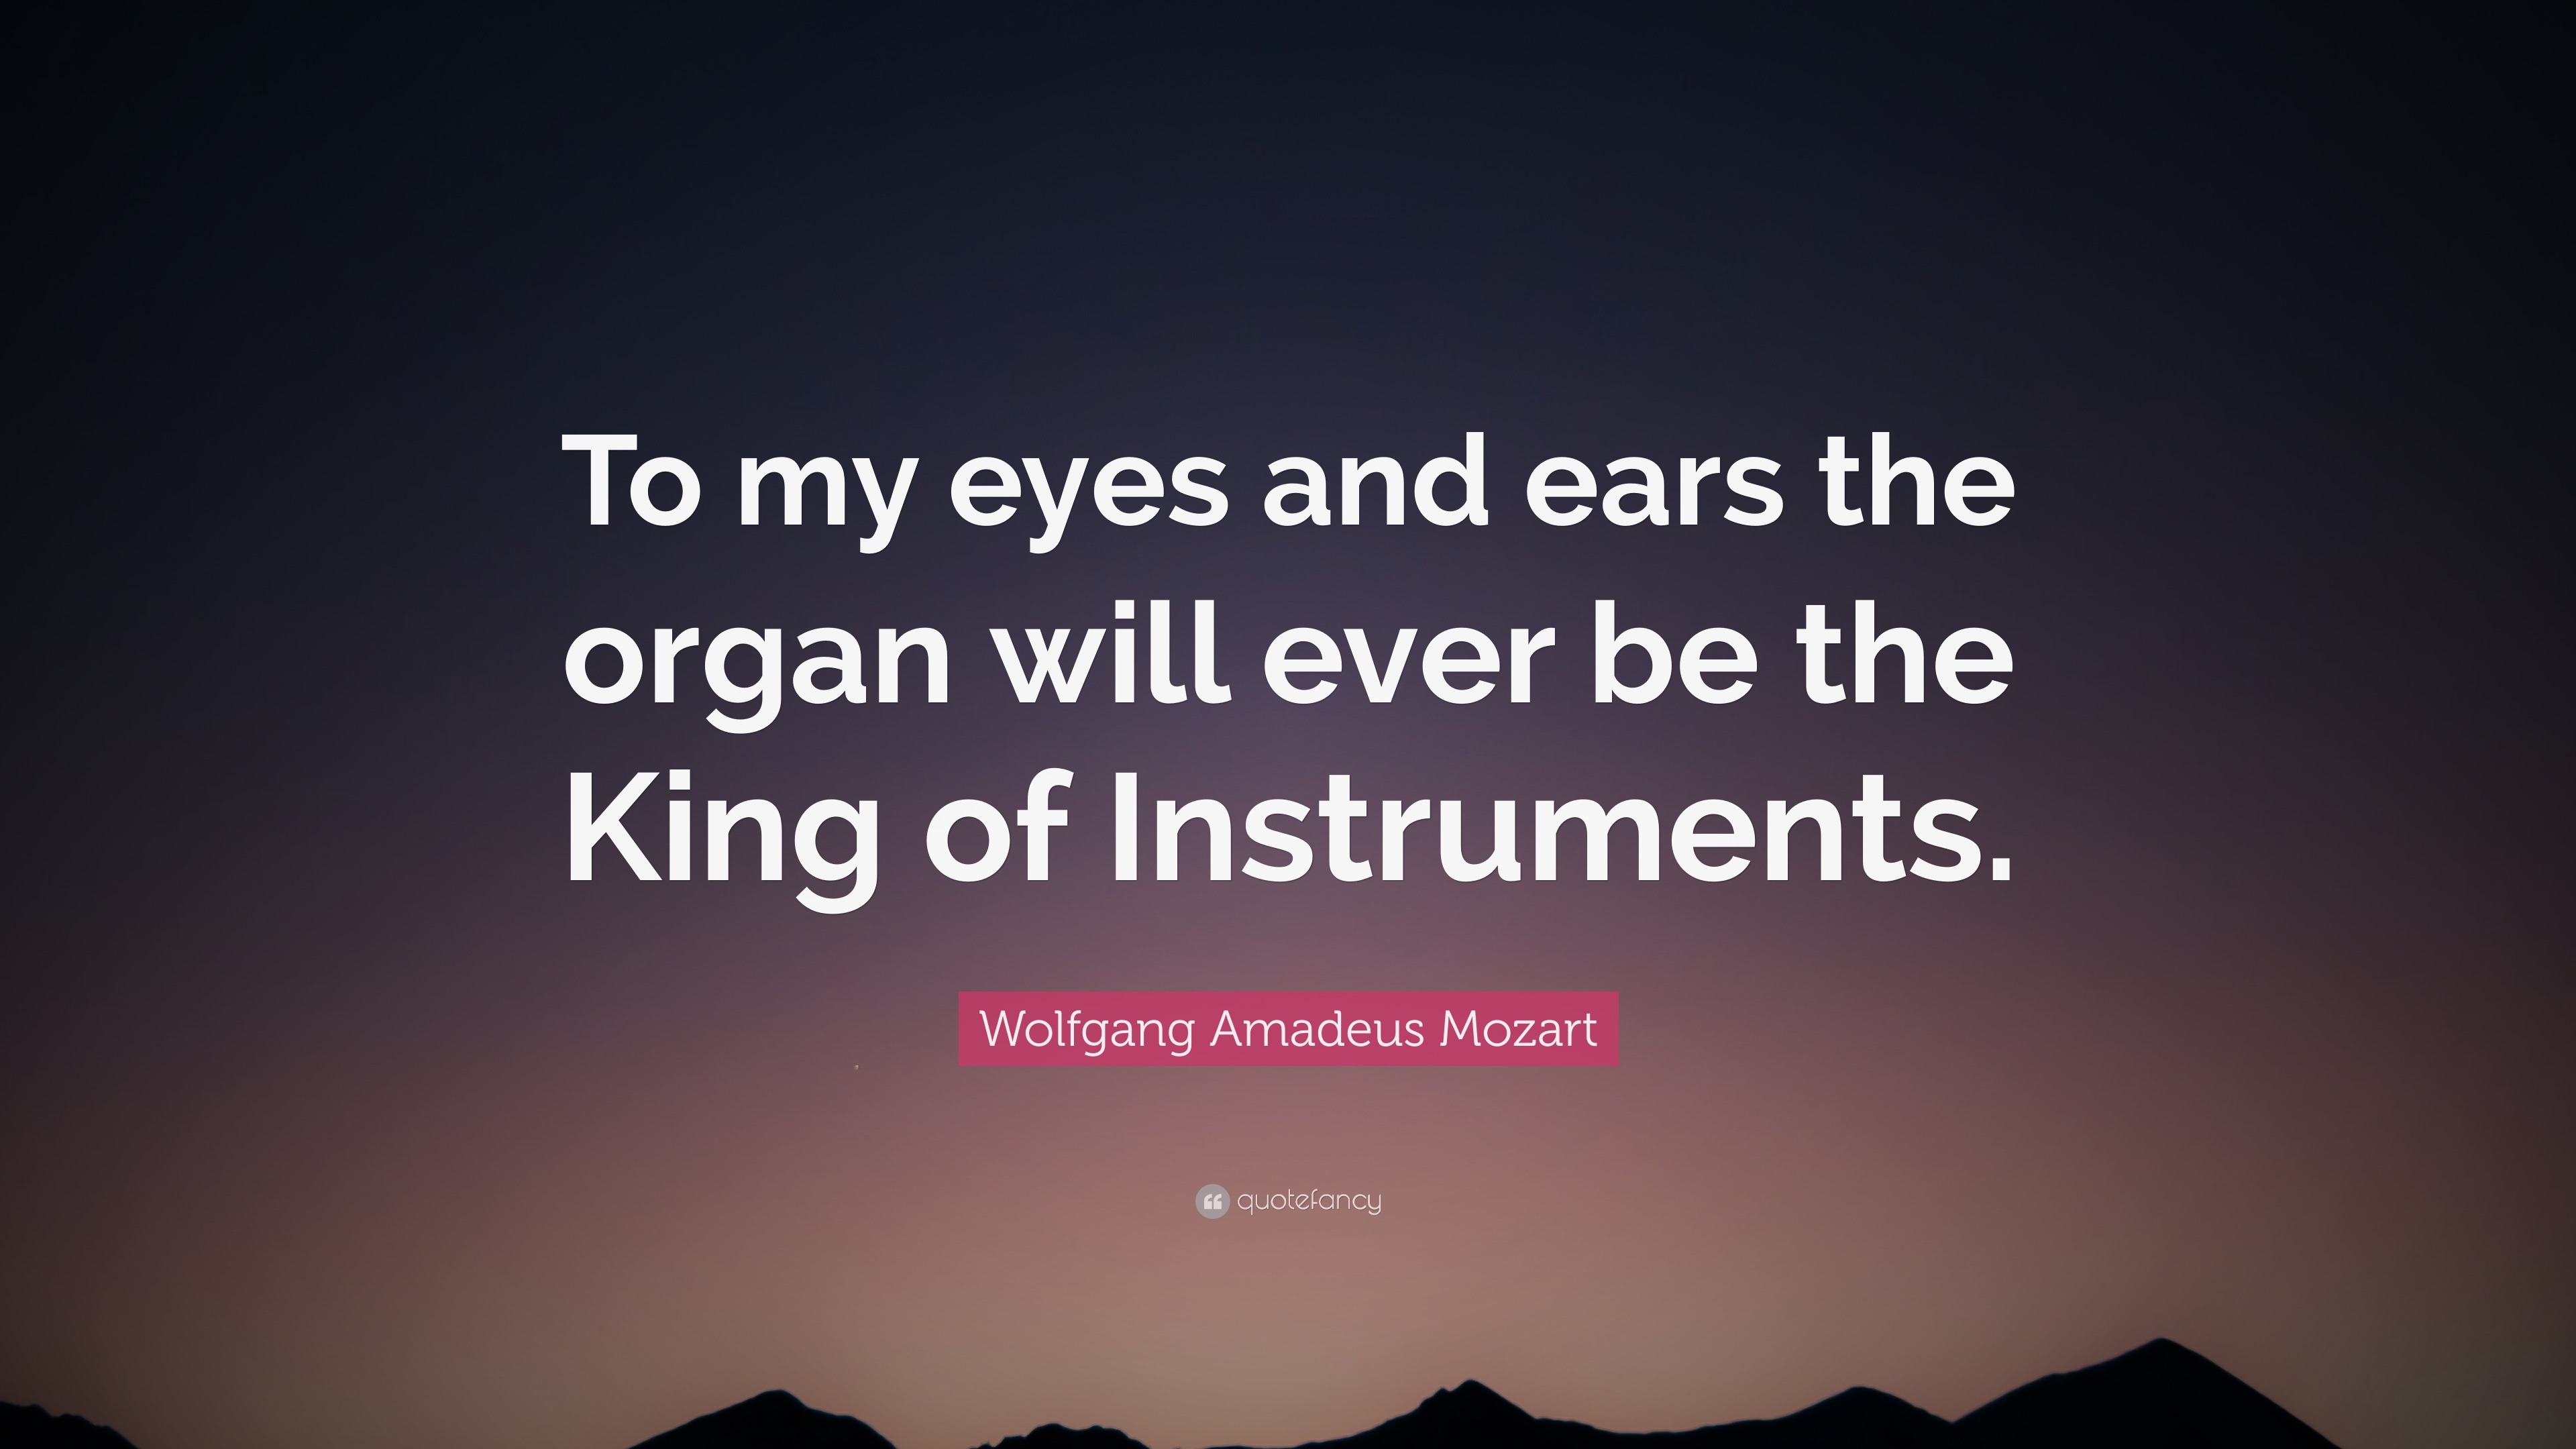 Wolfgang Amadeus Mozart Quote: “To my eyes and ears the organ will ever ...